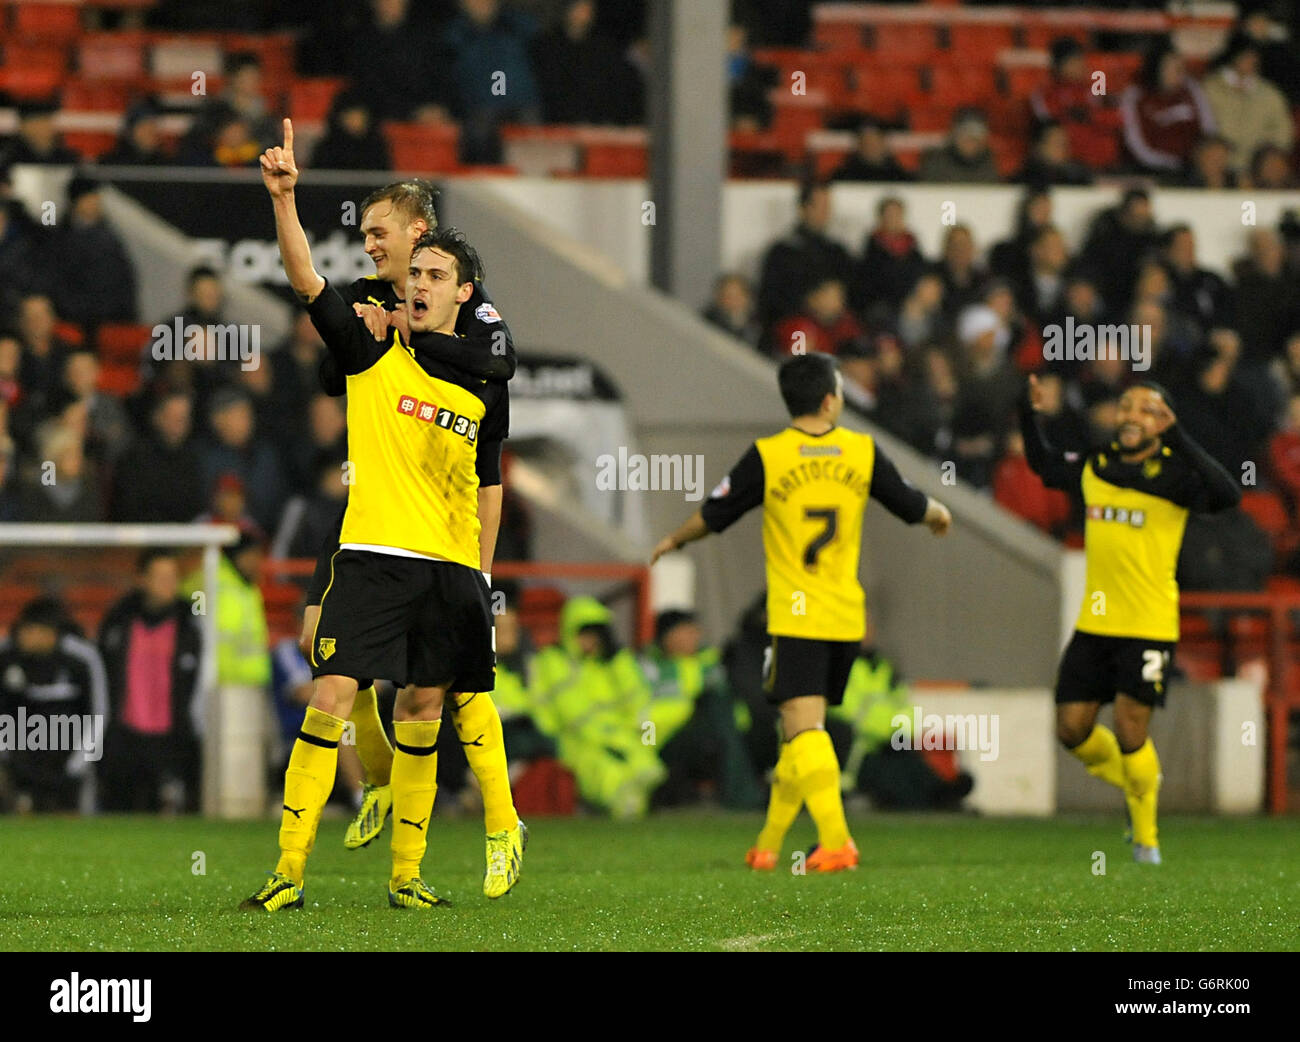 Soccer - Sky Bet Championship - Nottingham Forest v Watford - City Ground. Watford's Gabriele Angella (front left) celebrates scoring his sides first goal of the game Stock Photo